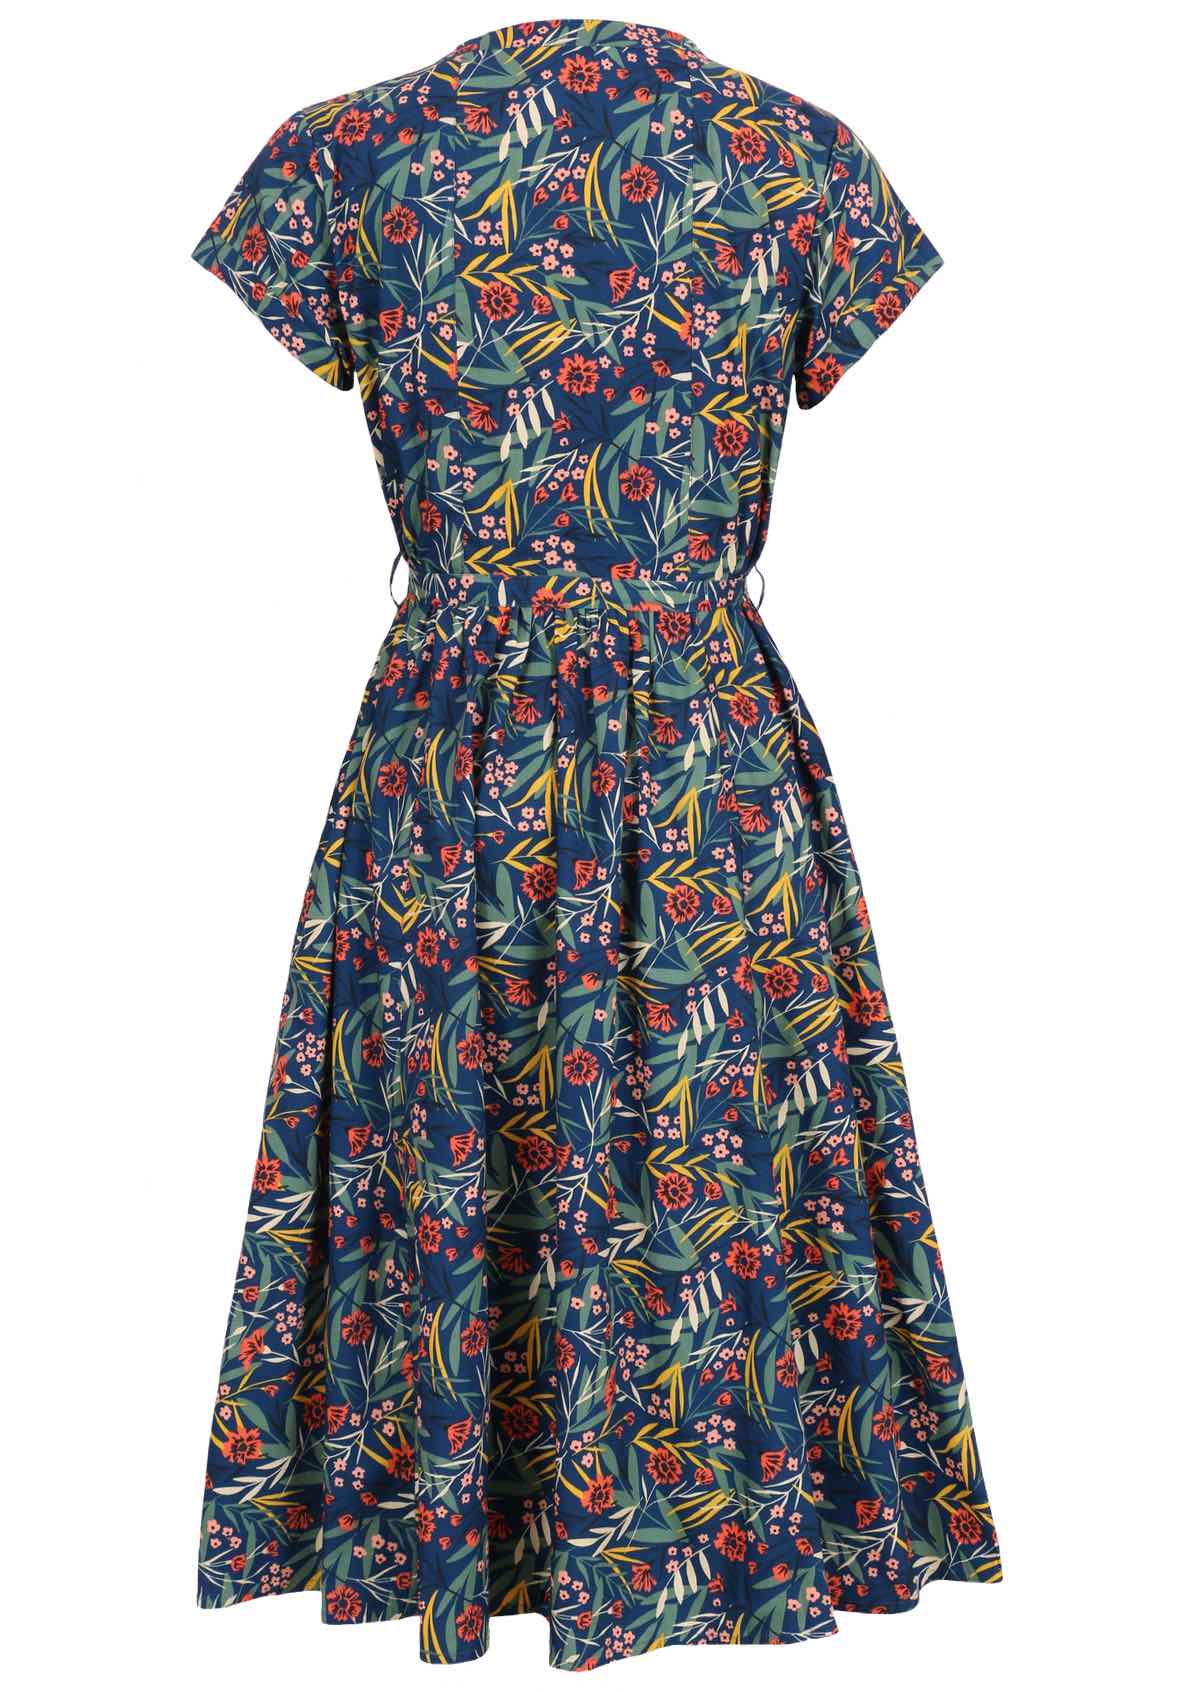 Teal based floral fit and flare cotton dress with cotton tie belt